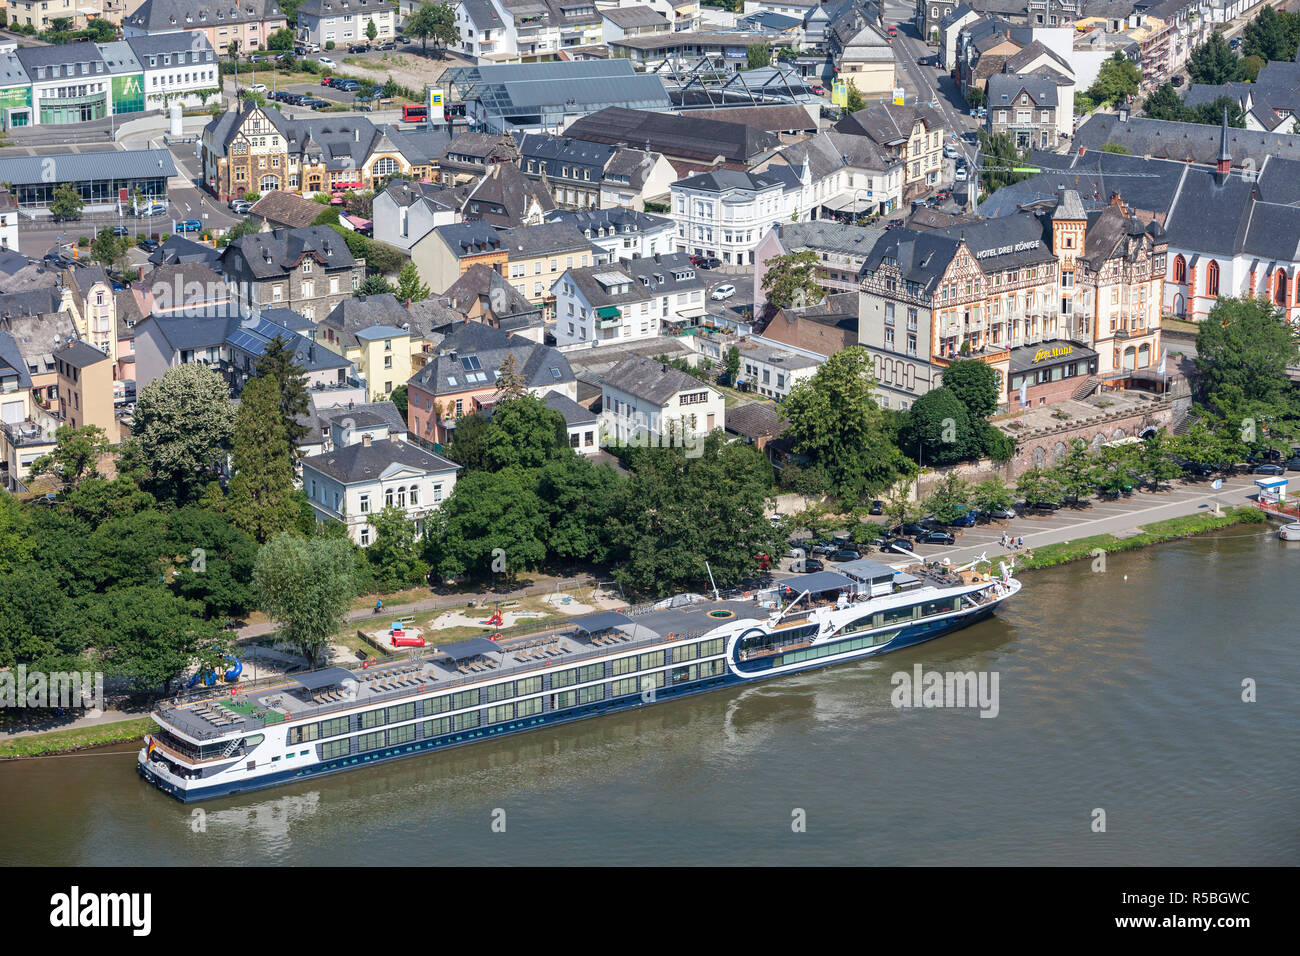 Bernkastel-Kues, Germany, with  Moselle River Cruise Boat. Stock Photo